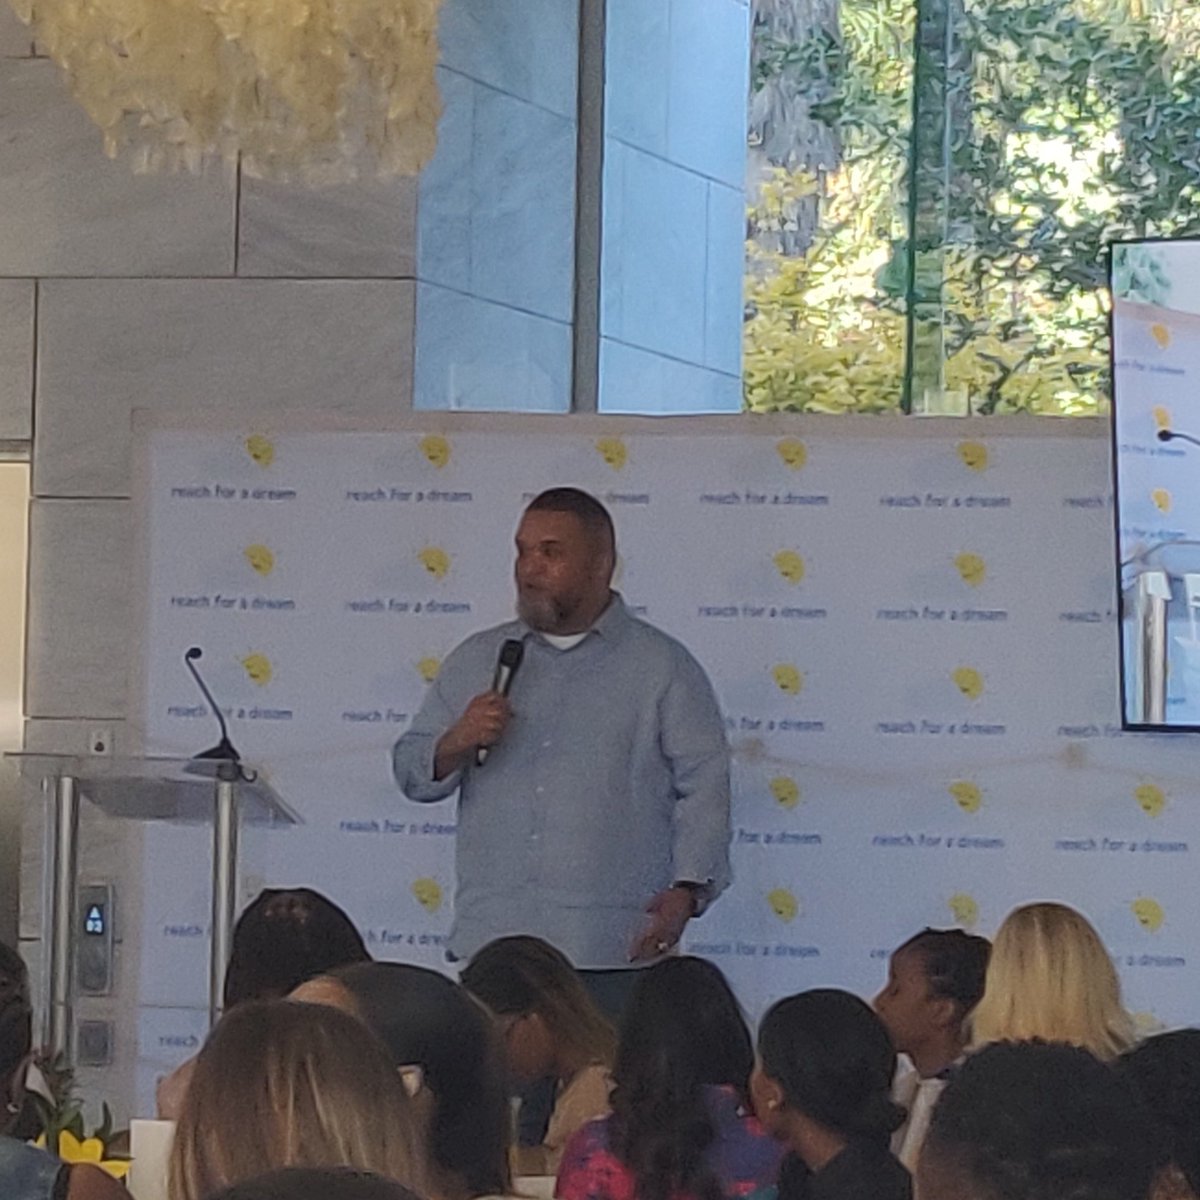 Comedian @JasonGoliath MC'ing the @ReachForADream official launch of the #SlipperDay2024 fundraising campaign.

#StepIntoMySlippers #InspireHope #ReachForADream